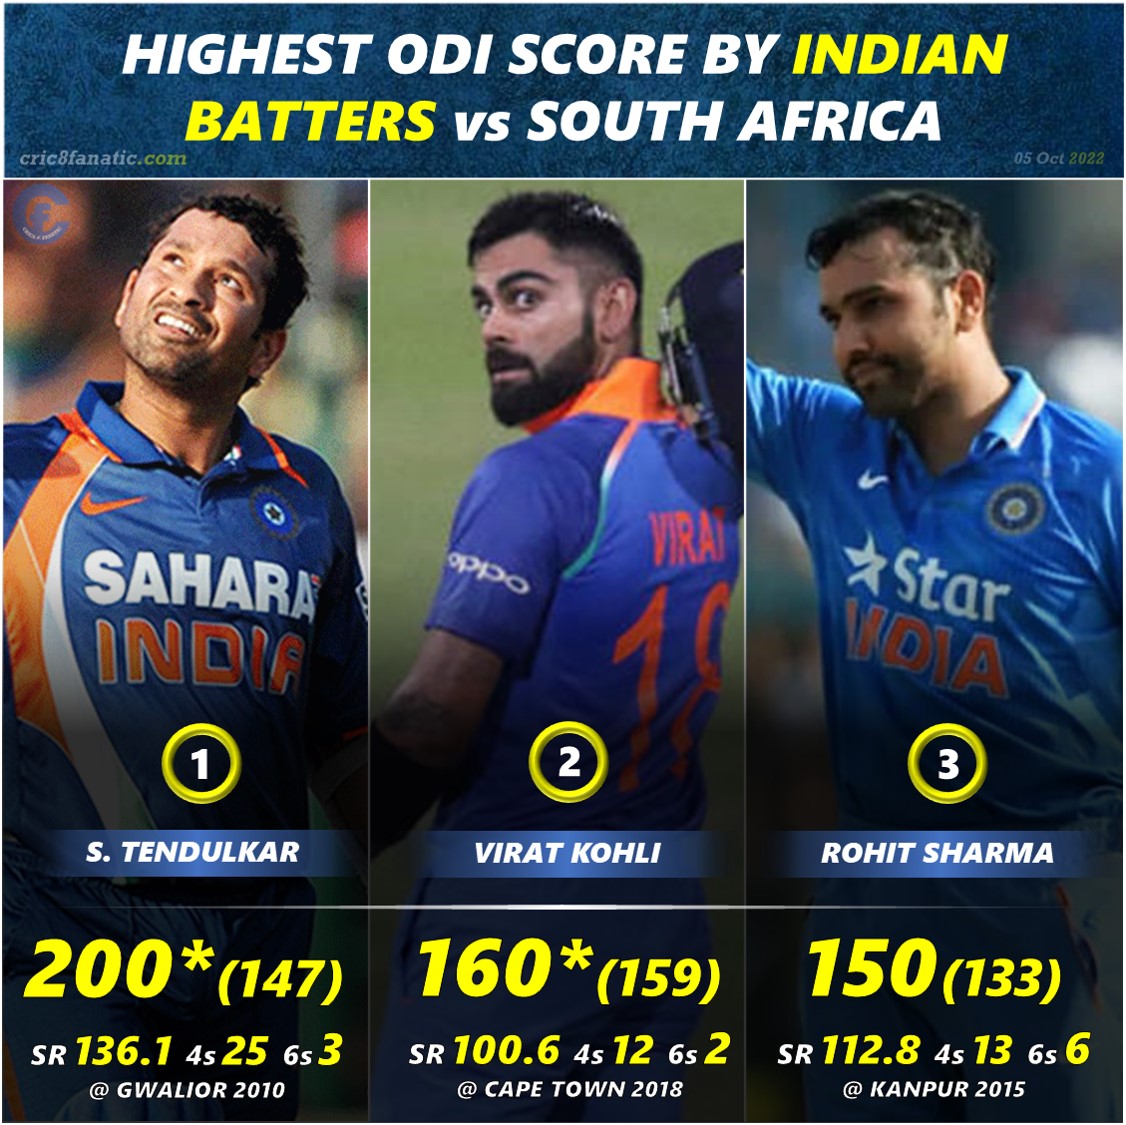 highest odi score vs south africa by india batters cricalytics